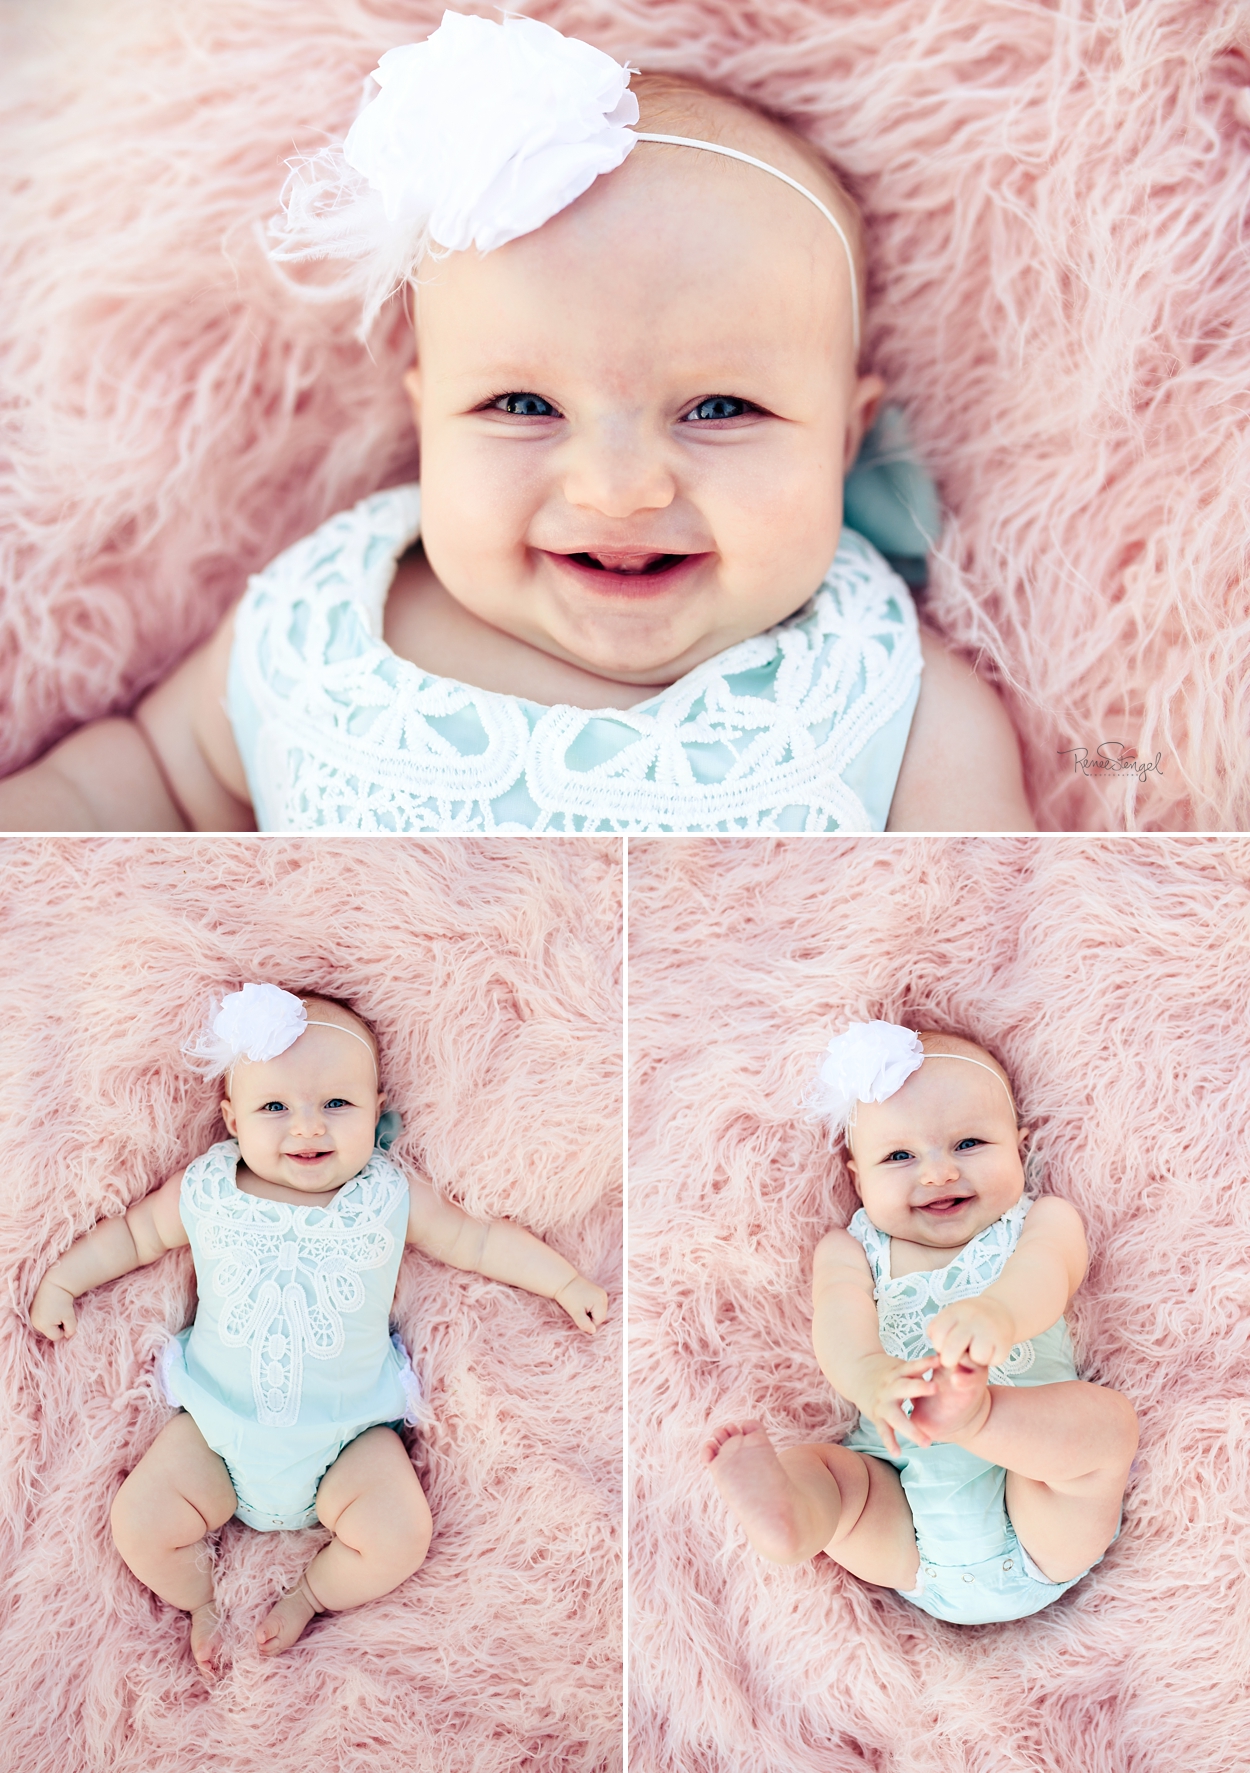 RENEE STENGEL Photography | Charlotte Portrait and Underwater Photographer | Six Month Baby Milestone in Pink and Mint